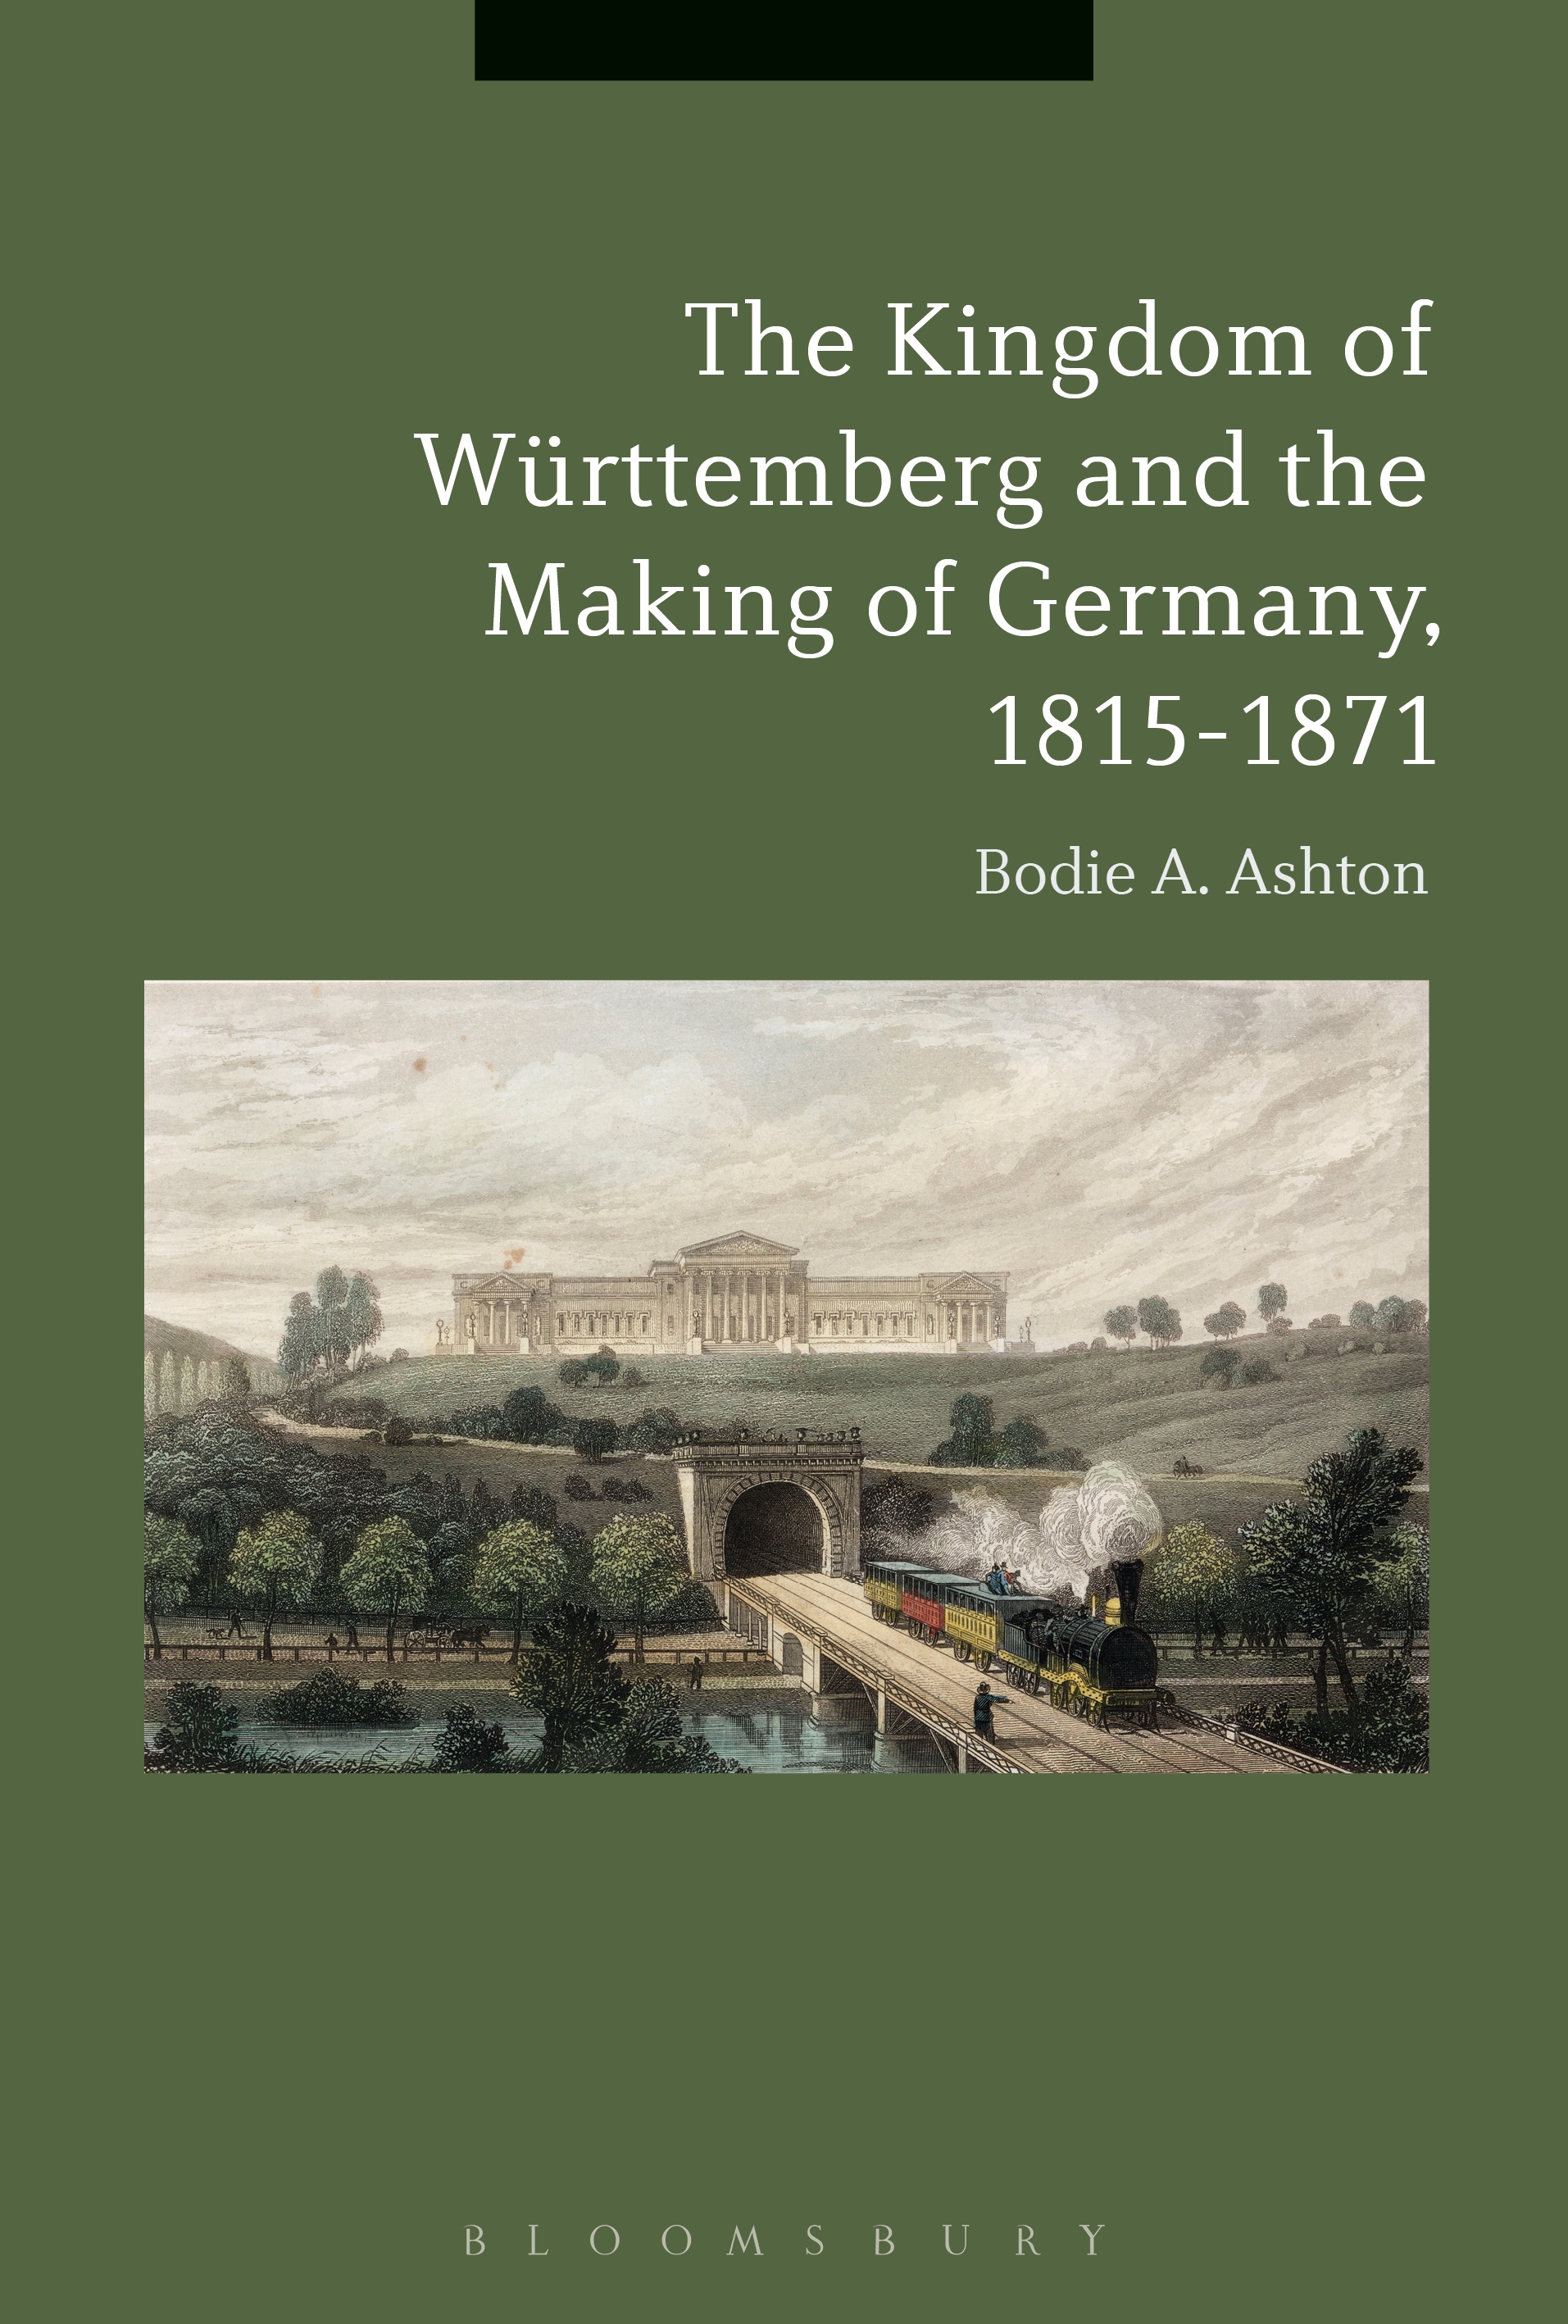 ISBN 9781350000094 product image for The Kingdom of Württemberg and the Making of Germany, 1815-1871 | upcitemdb.com